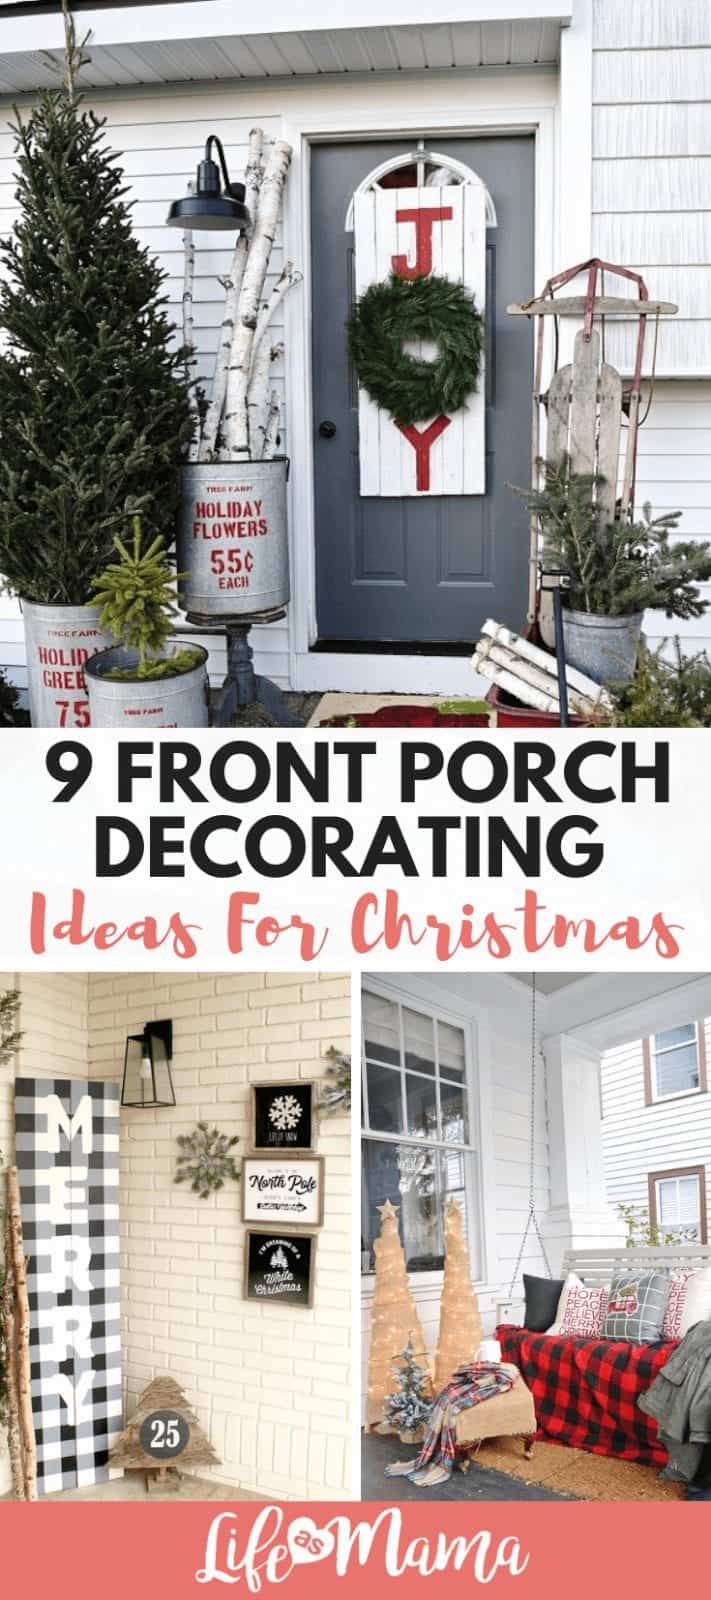 9 Front Porch Decorating Ideas For Christmas - Page 3 of 3